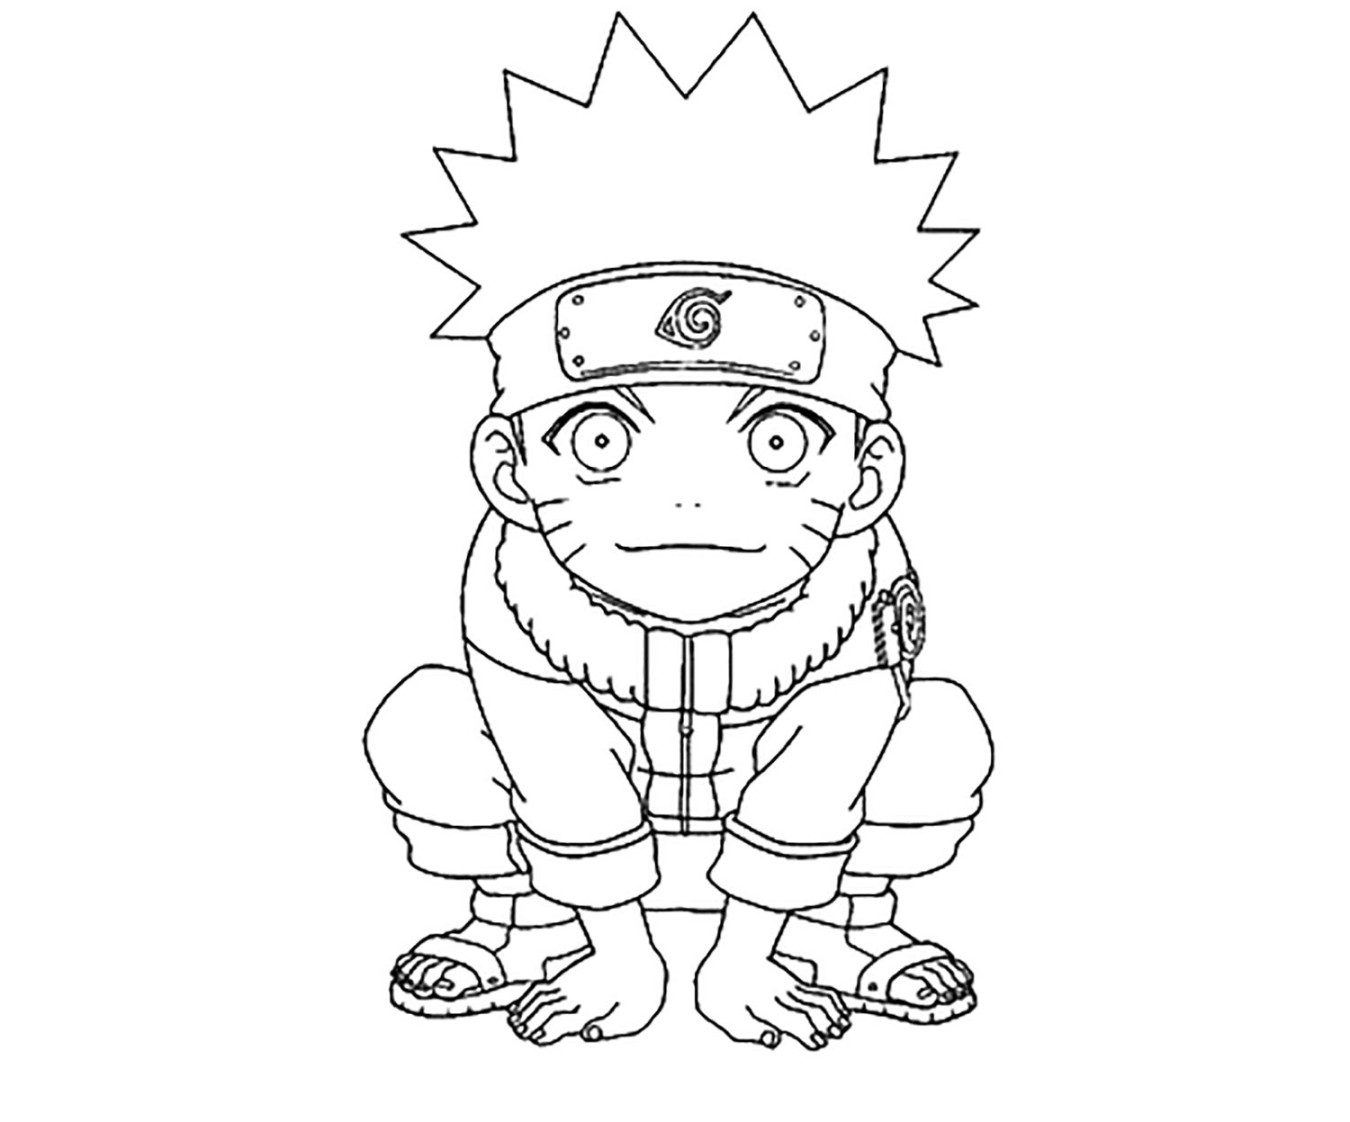 Little naruto - Naruto Kids Coloring Pages